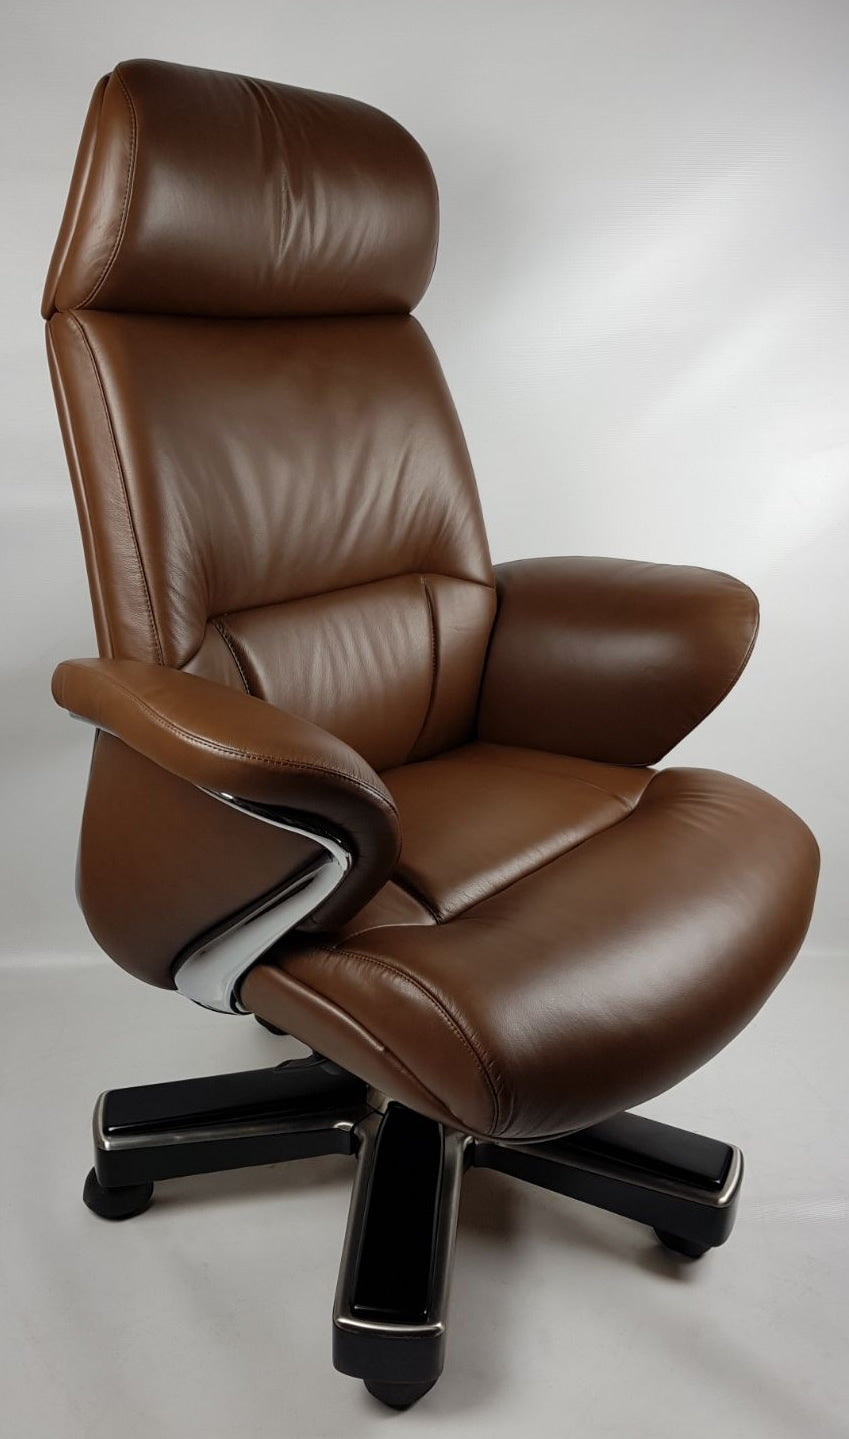 Large Luxury Executive Office Chair with Genuine Brown Leather - YS1605A Near Me